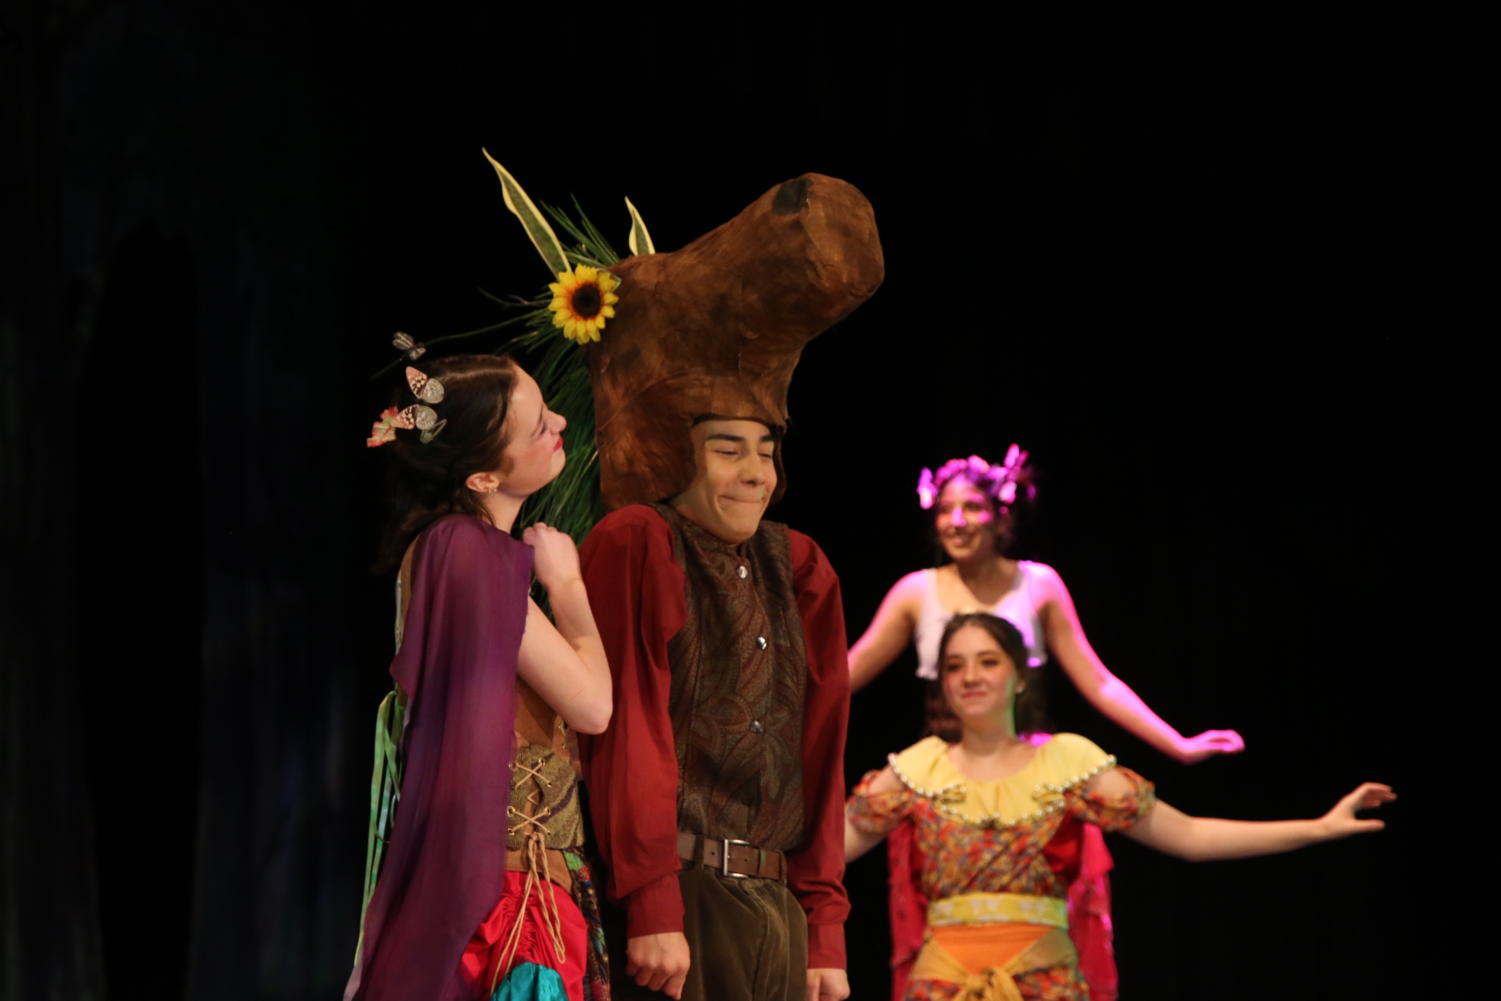 Junior Sophia Wheeler (left) and freshman Zach Carvajal (right) perform a scene during a dress rehearsal for Shakespeare’s “A Midsummer’s Night Dream” on May 18. Though the comedy is mainly written in Shakespearean English, the cast has added multiple ad-libs to modernize the play. “There were a lot of questions that first week,” head director Chesley Thornburg said. “How do I perform Shakespeare? What am I even saying? What is the plot? And it’s comedy, too, so the biggest question was: how do I make this funny?”